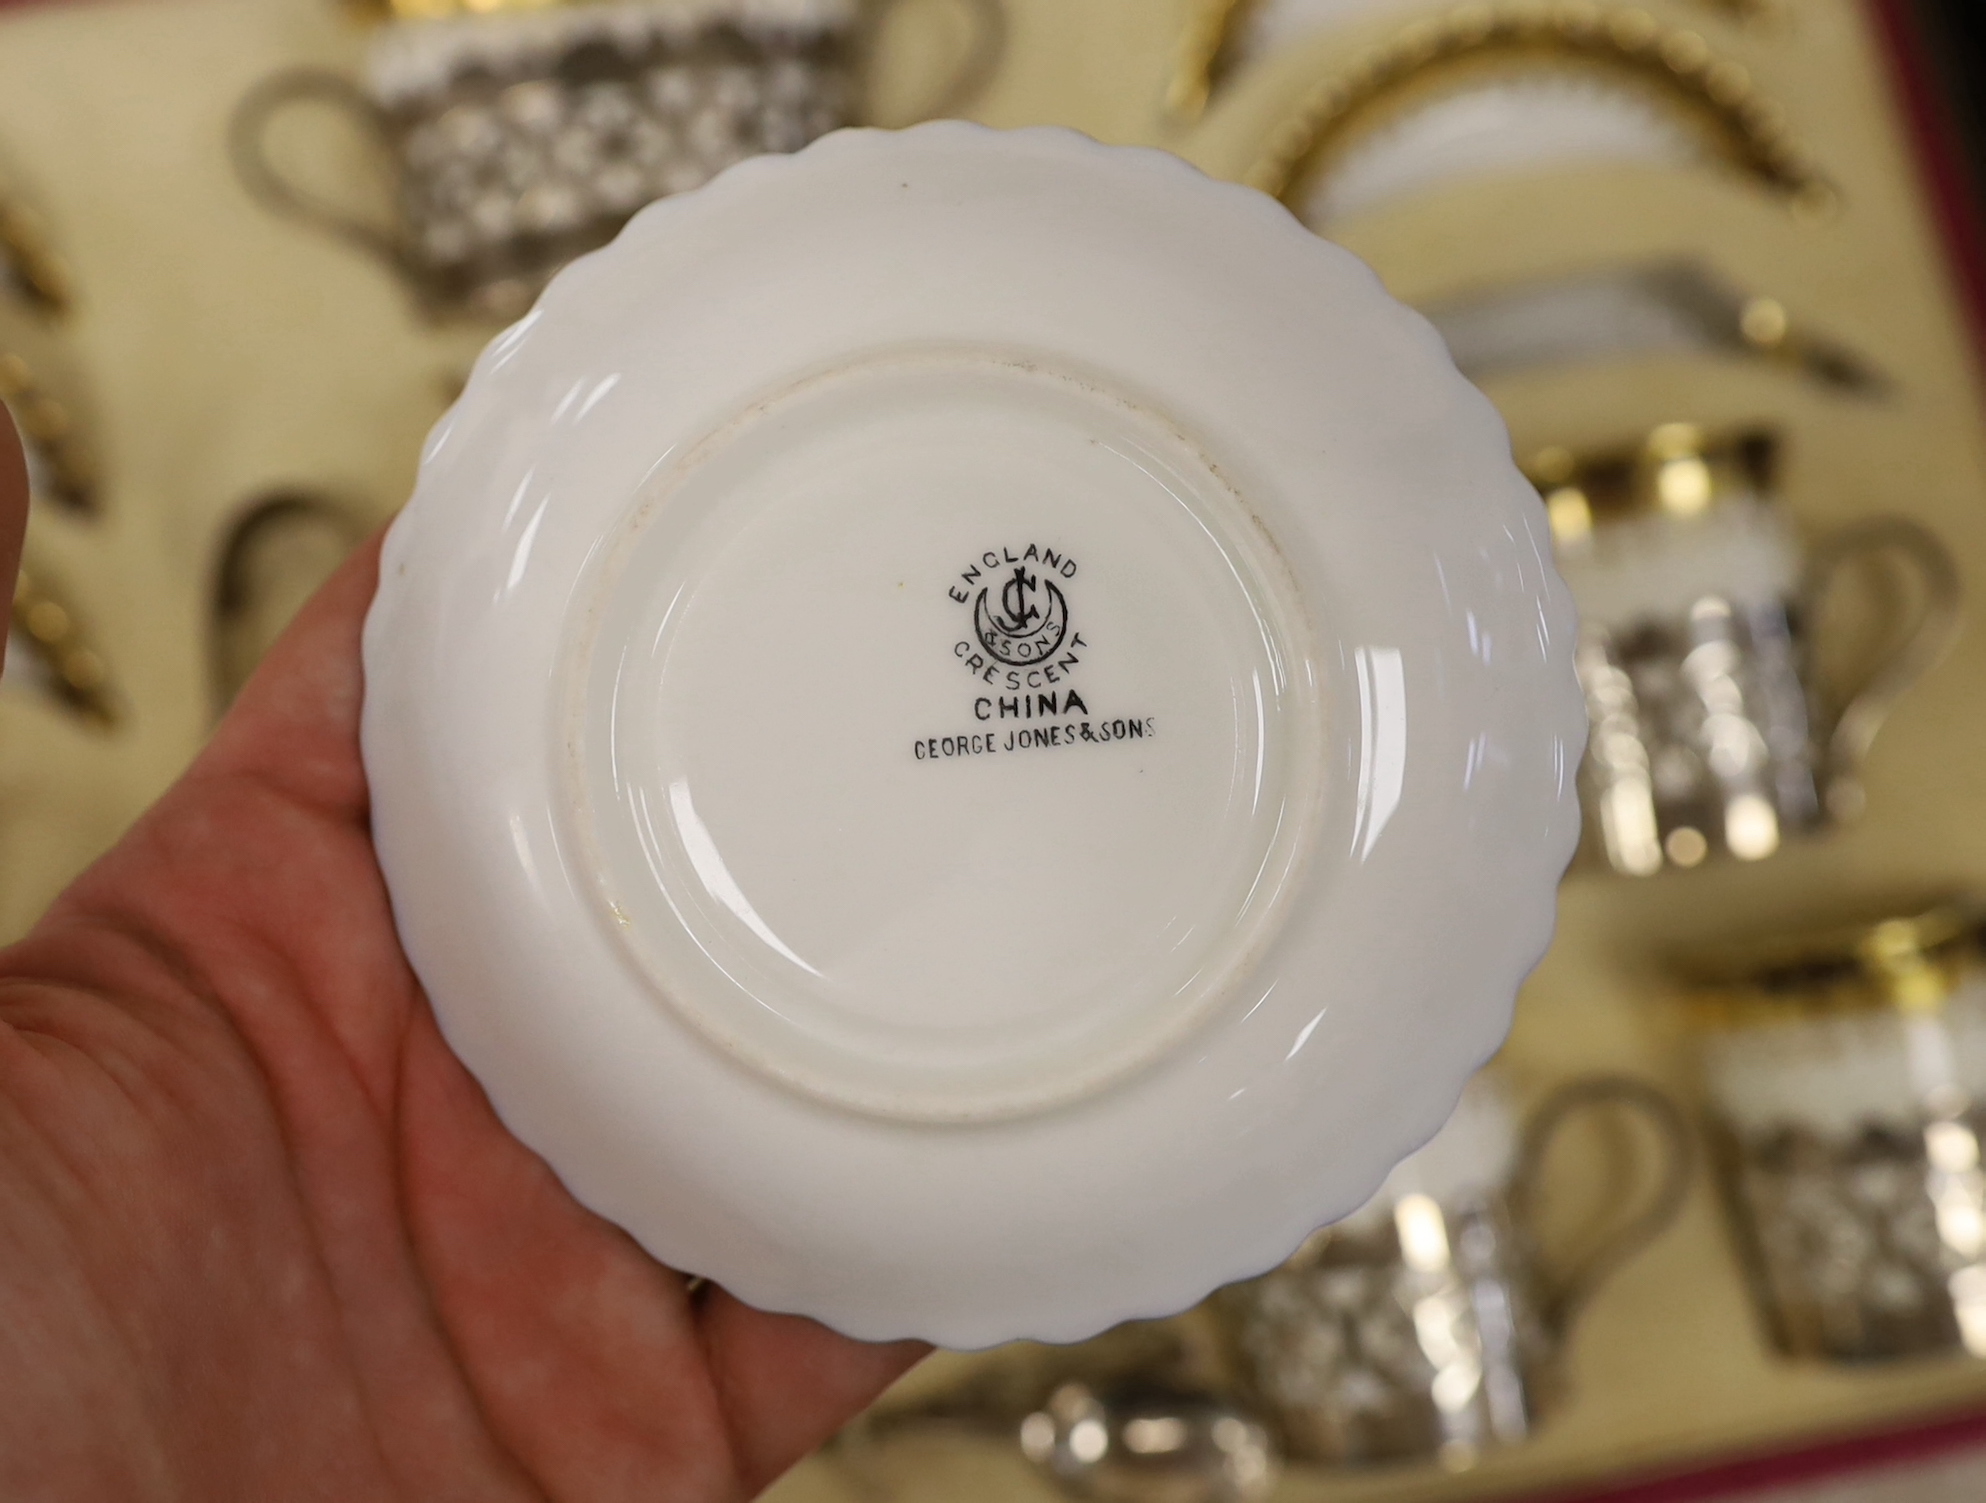 A cased George Jones Crescent China silver mounted coffee set, marks for Alexander Clark Co Ltd Sheffield 1928